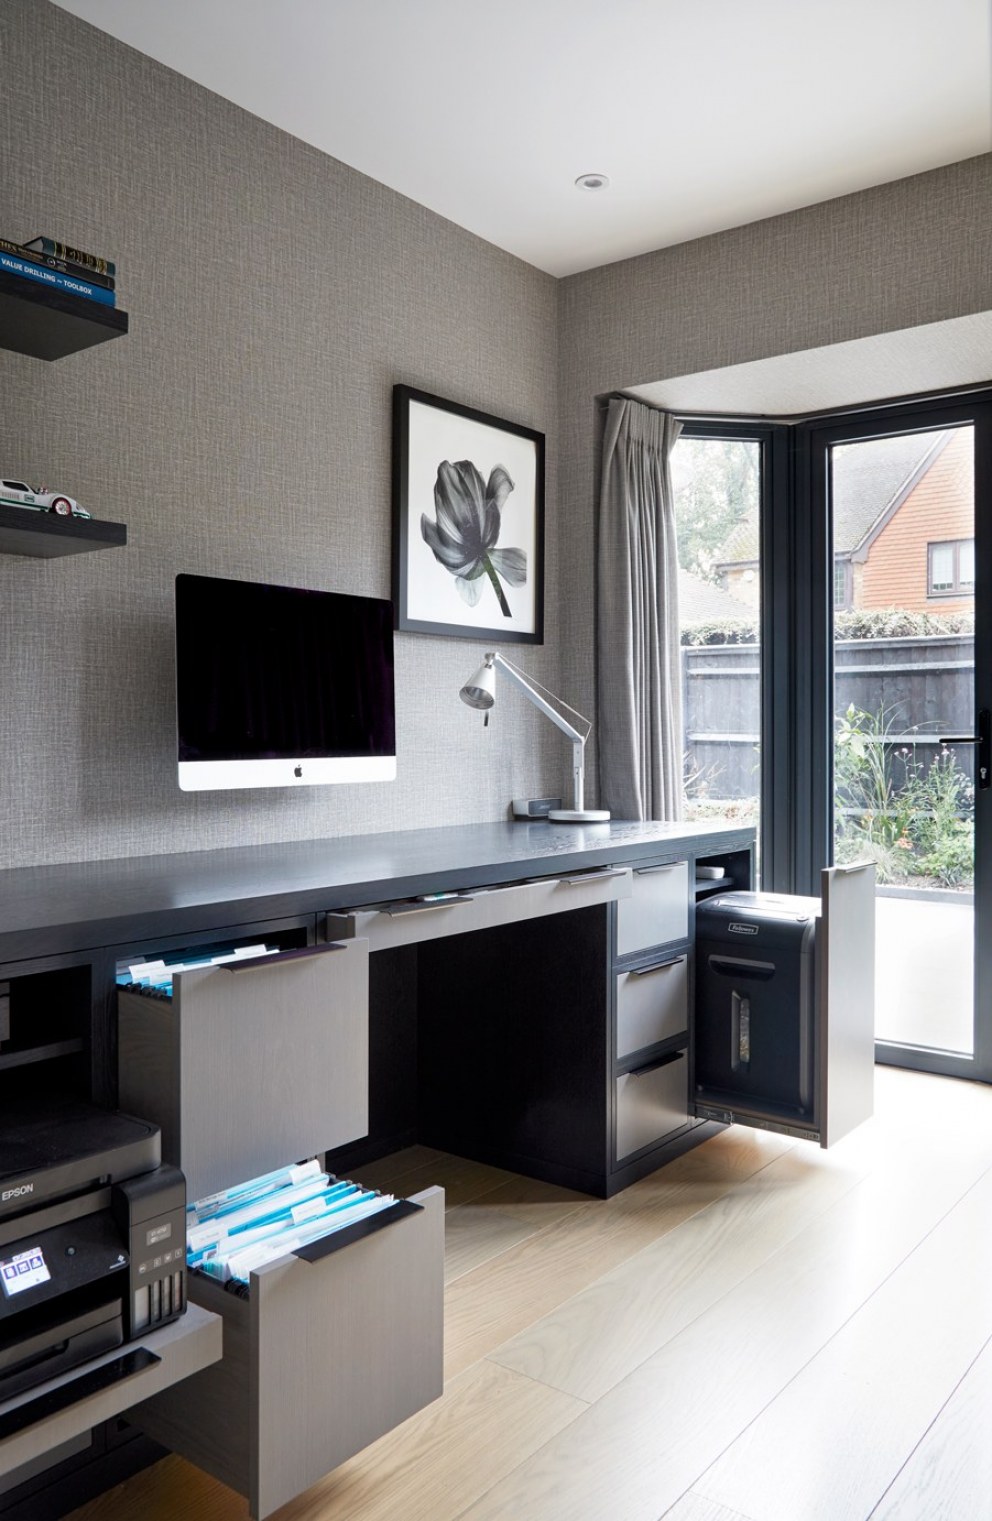 Maidenhead - Contemporary home | Home Office Bespoke Joinery | Interior Designers